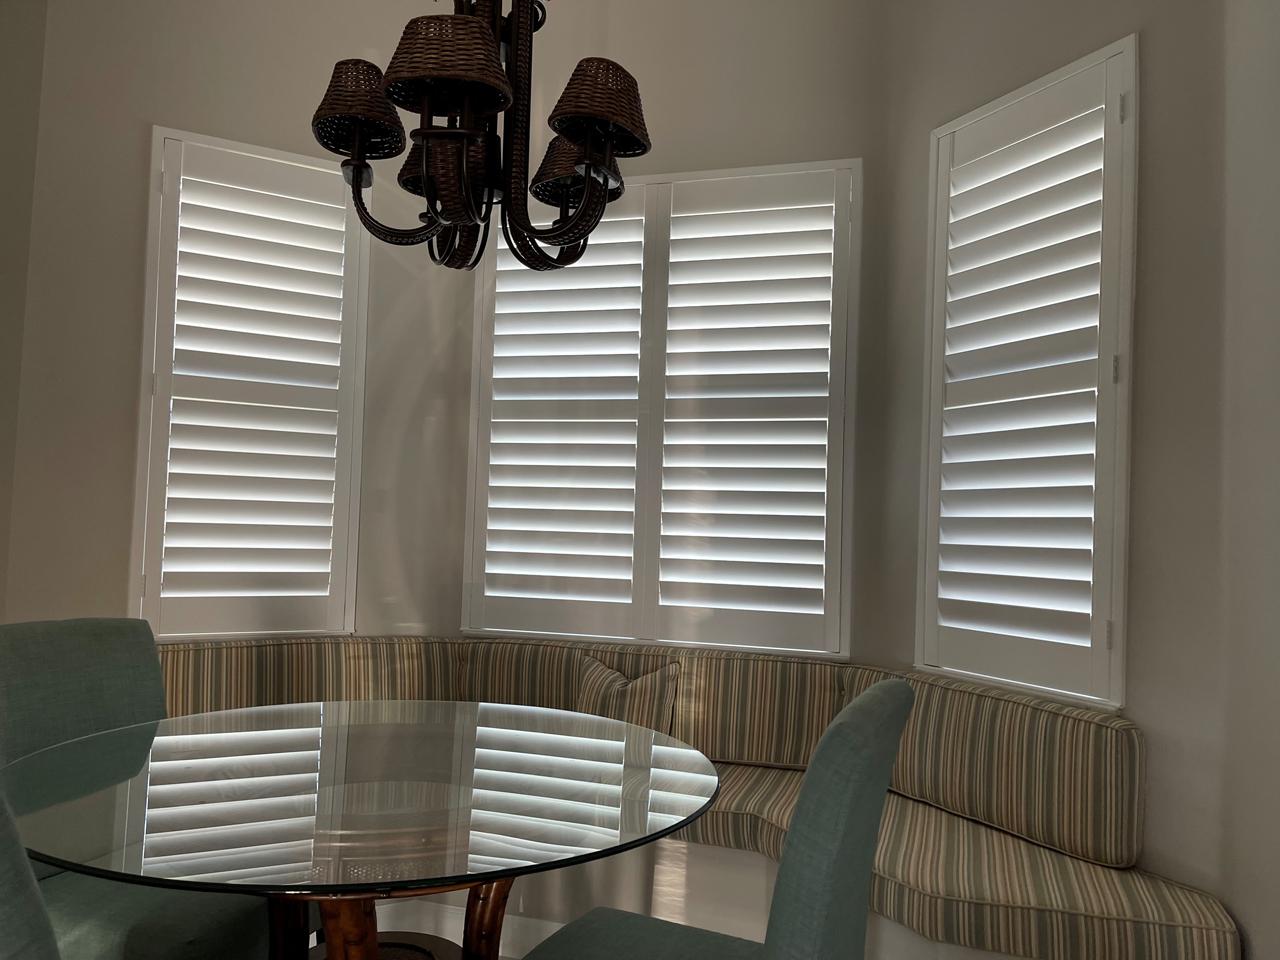 Dining table with shutters